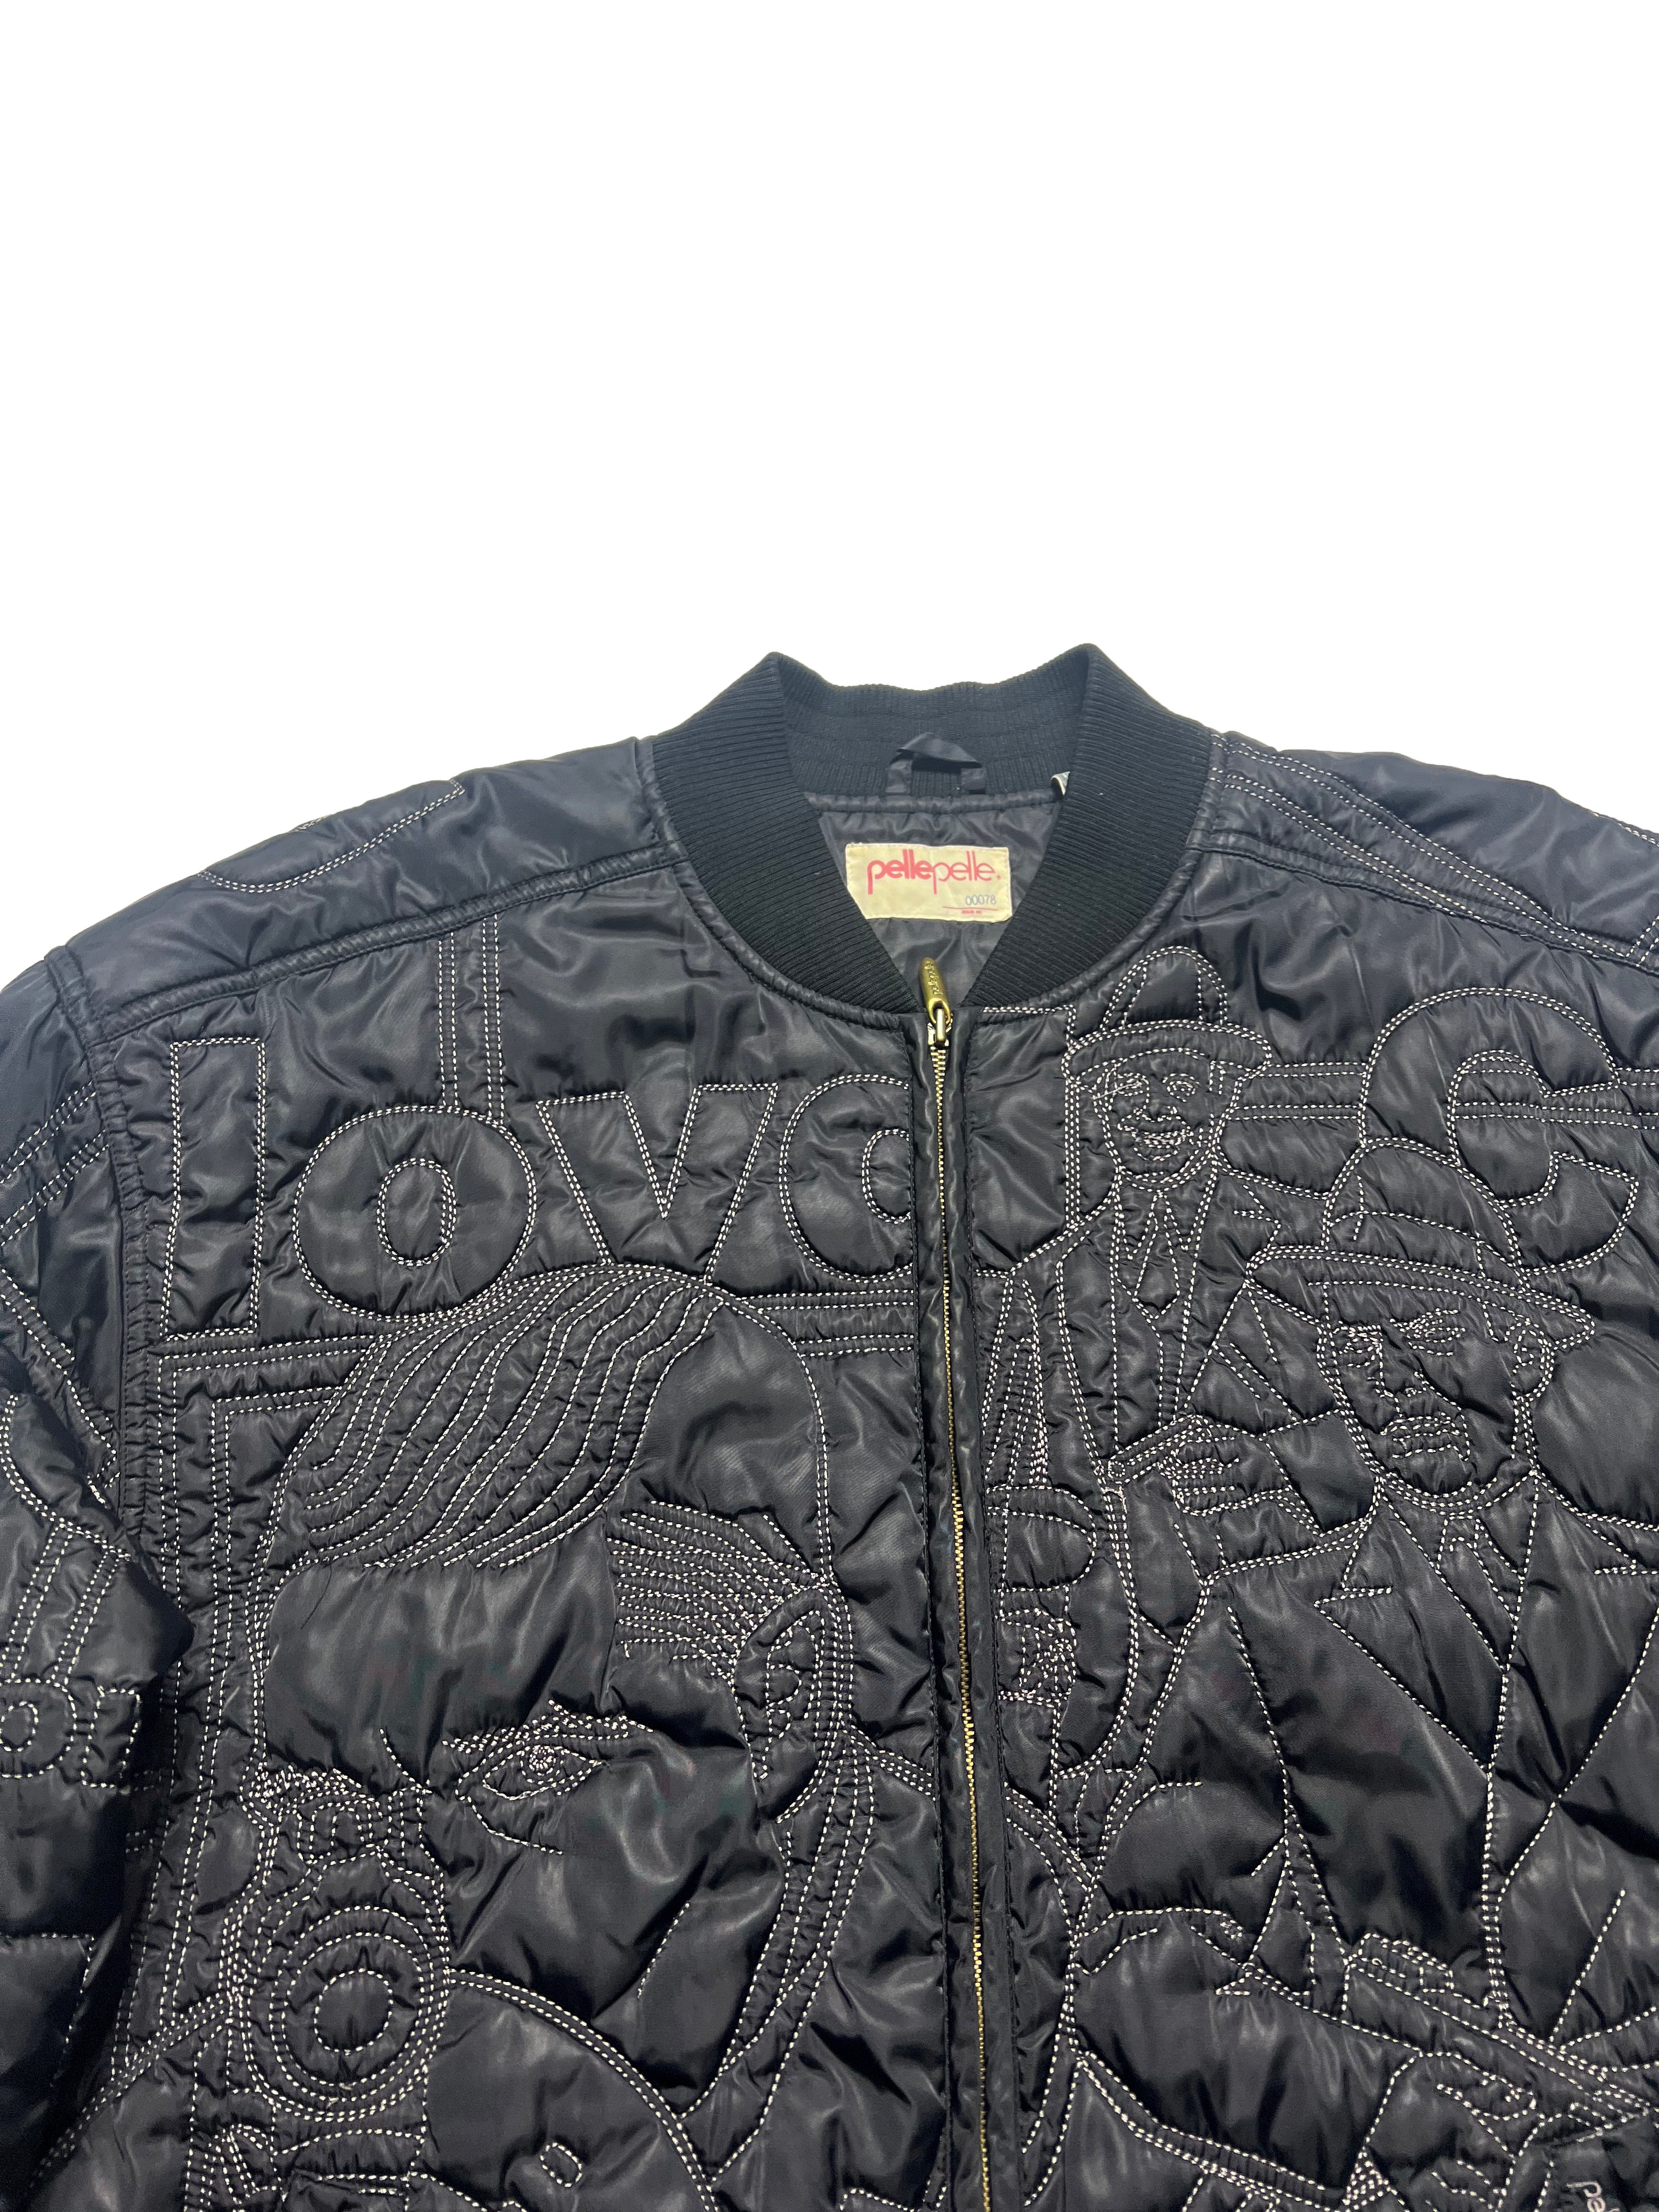 Pelle Pelle 'Gangsters' Embroidered Bomber Jacket 00's